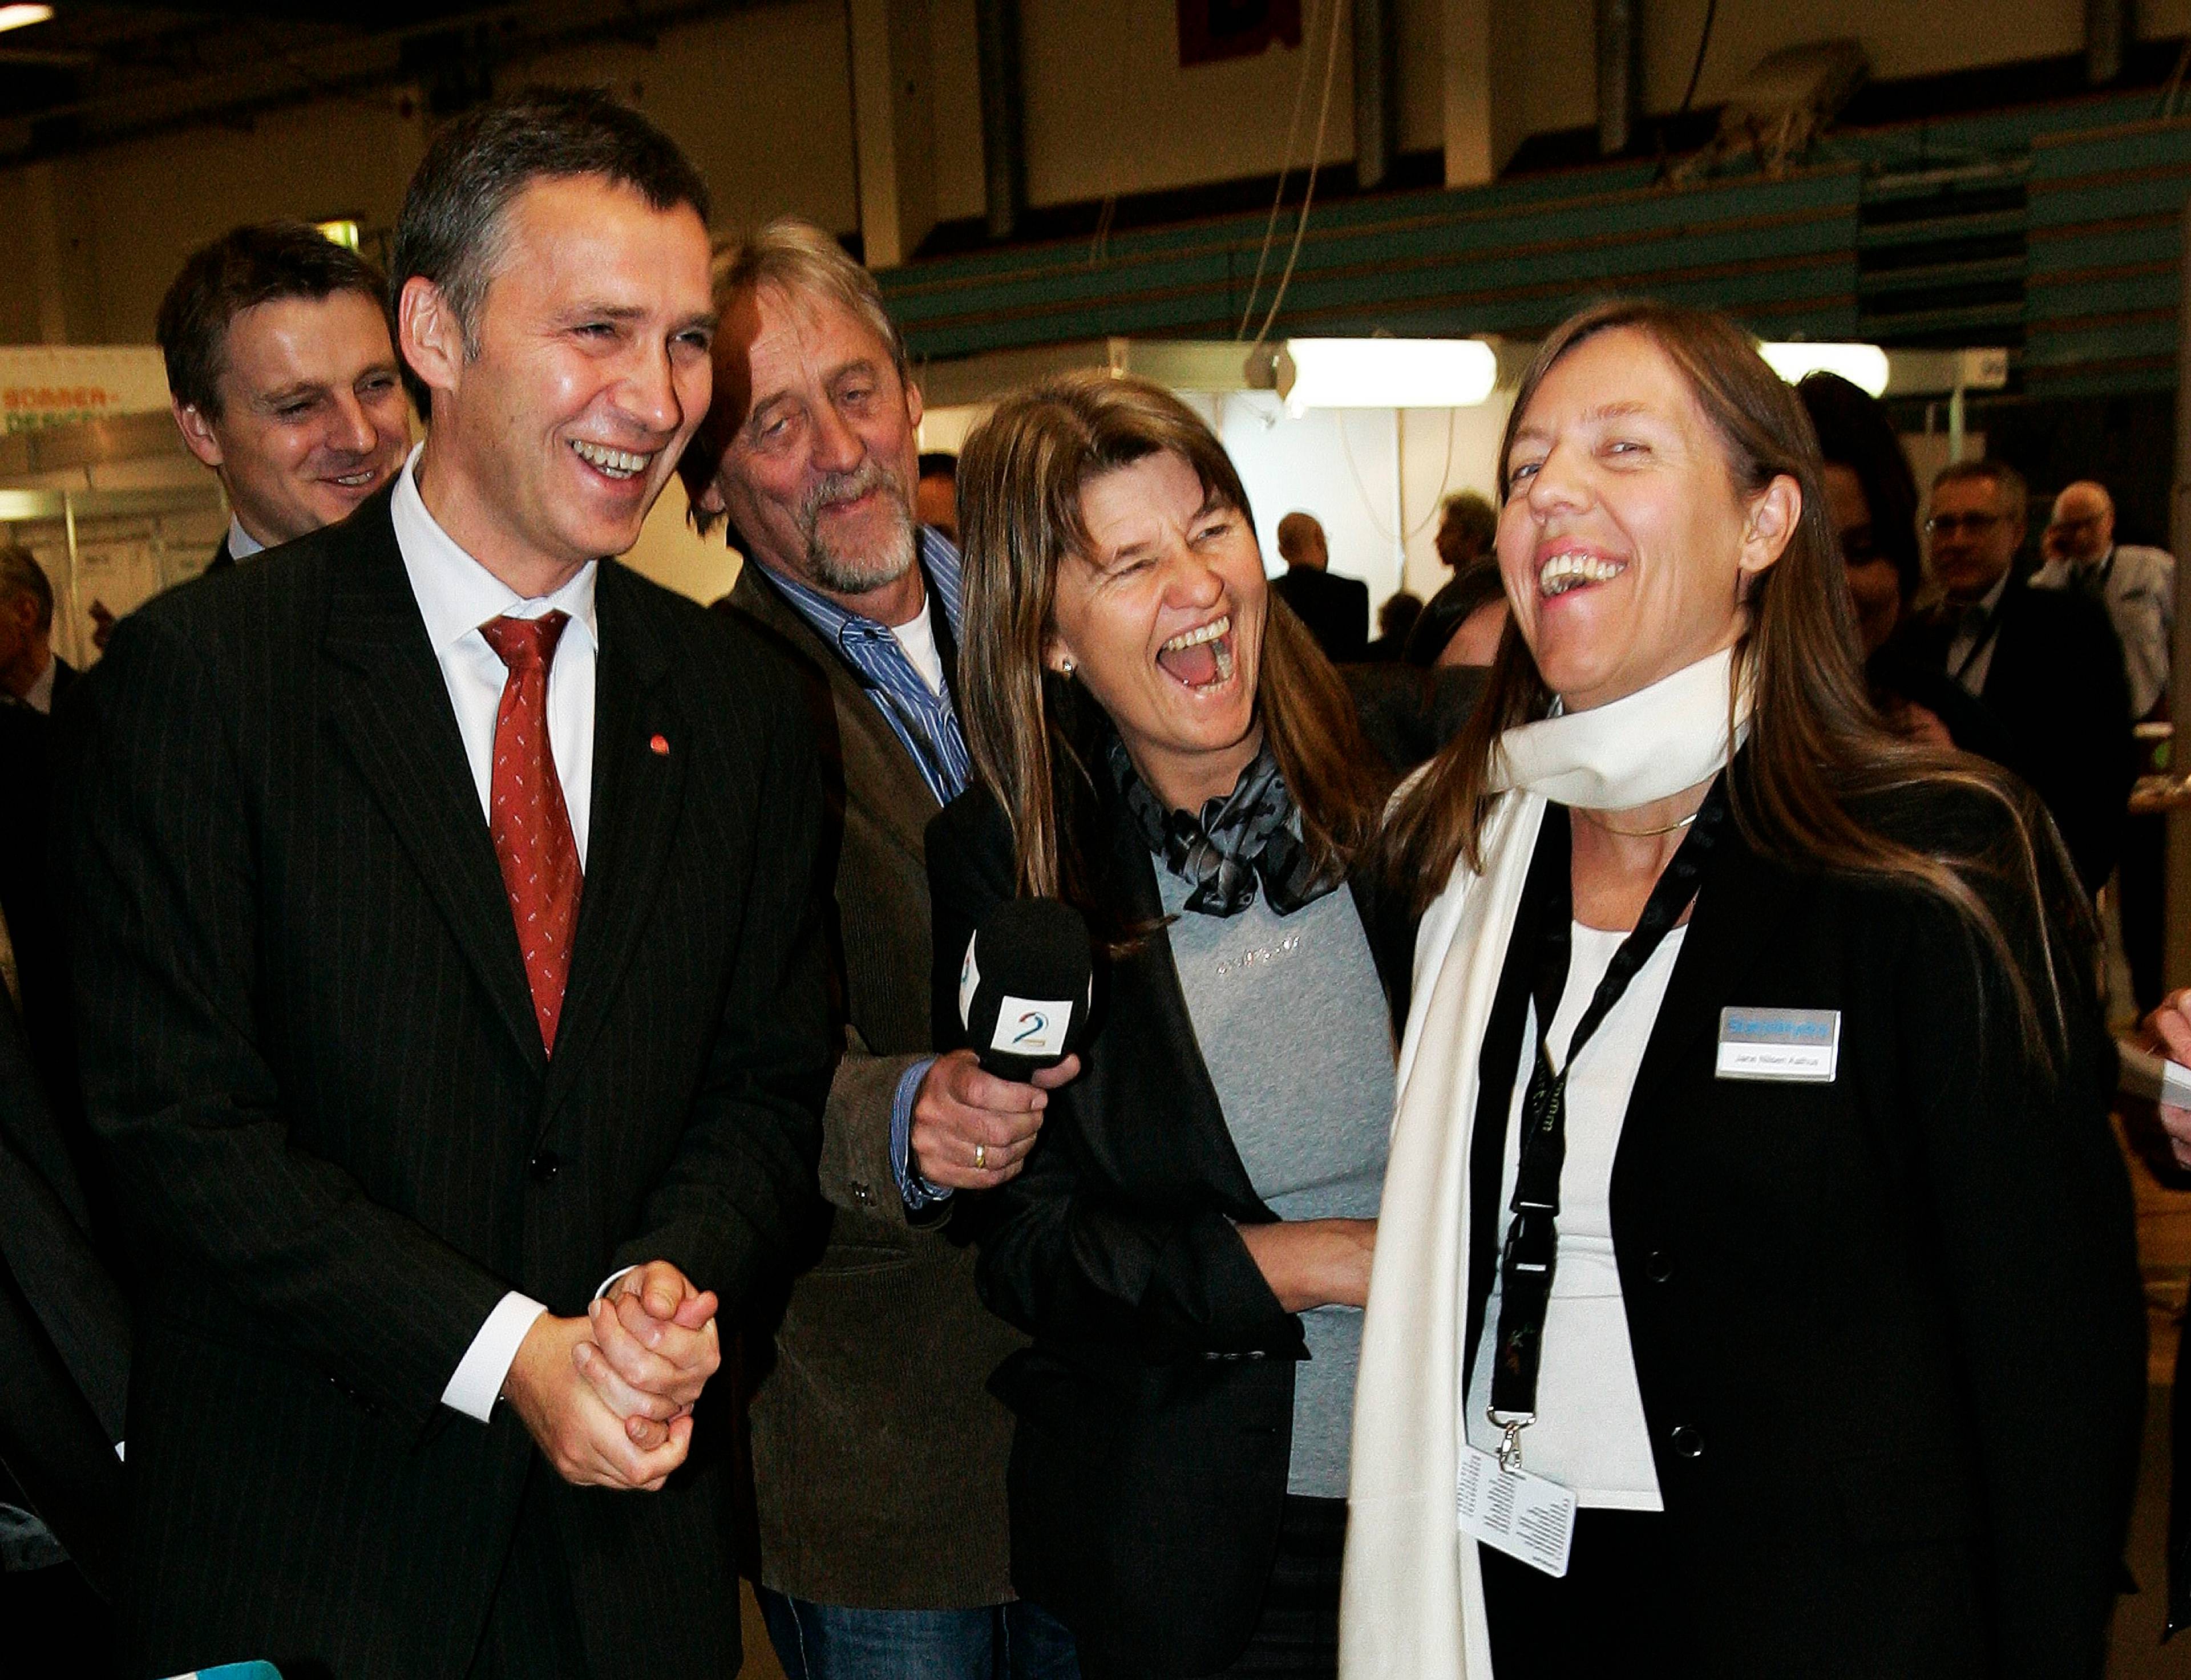 The atmosphere was cheerful in Trondheim when Øvrum and Jane Nilsen Aalhus hosted then Prime Minister Jens Stoltenberg at a technology summit in 2007.